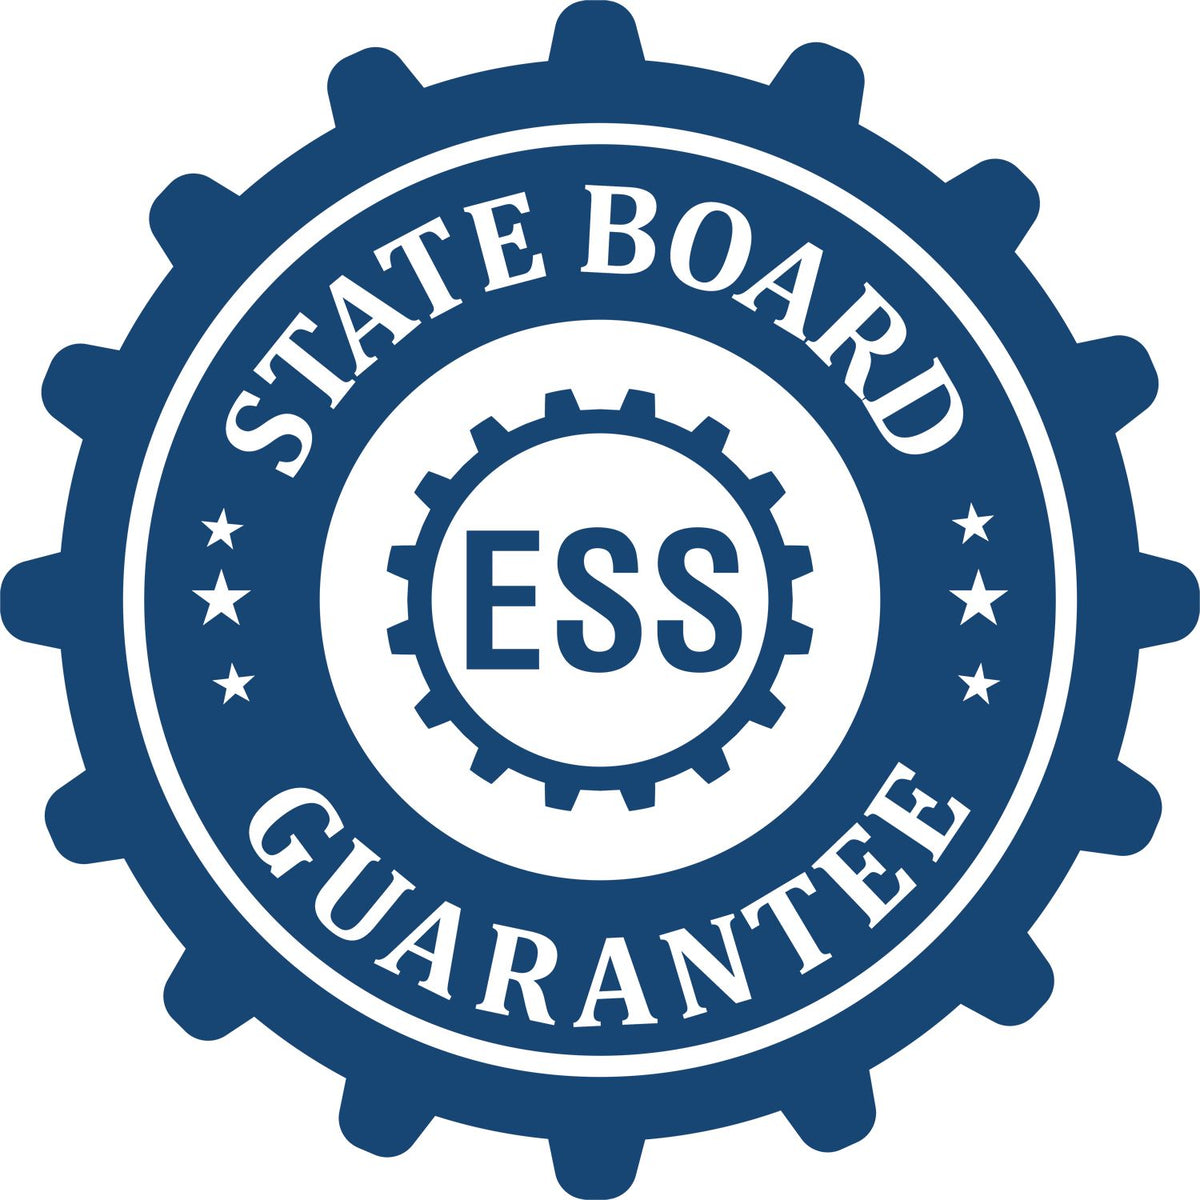 An emblem in a gear shape illustrating a state board guarantee for the Wooden Handle New York State Seal Notary Public Stamp product.